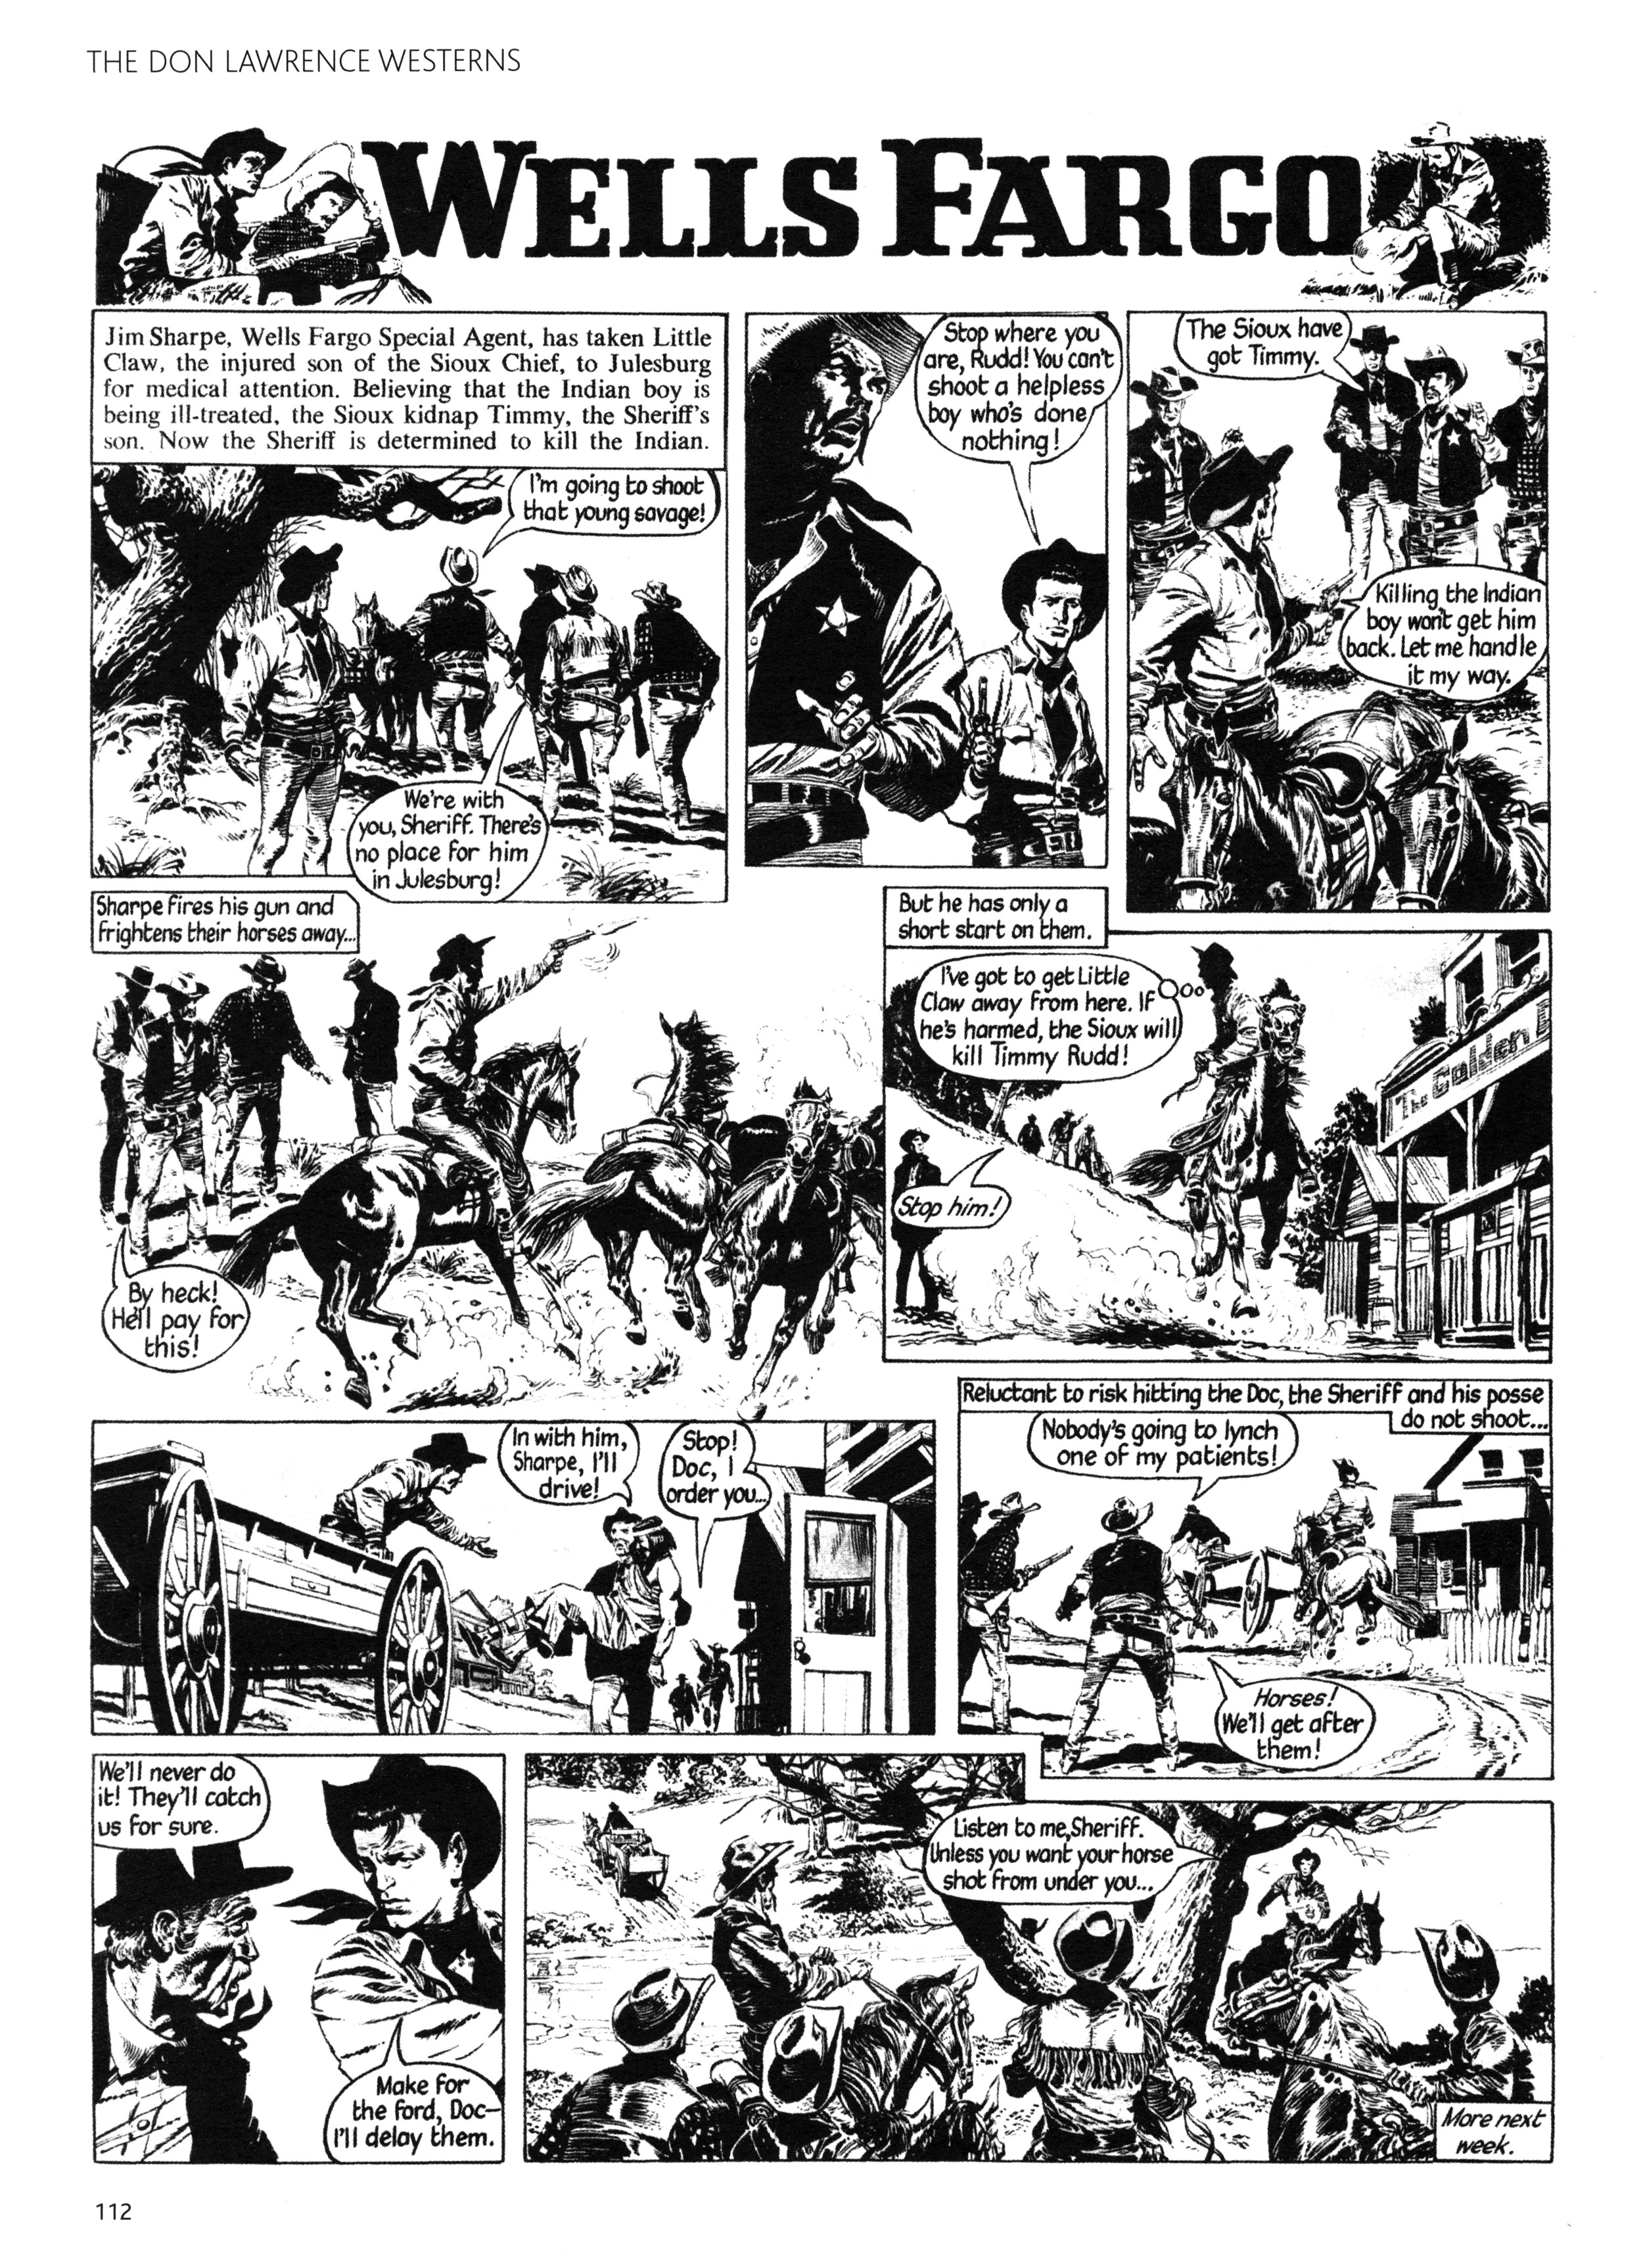 Read online Don Lawrence Westerns comic -  Issue # TPB (Part 2) - 13